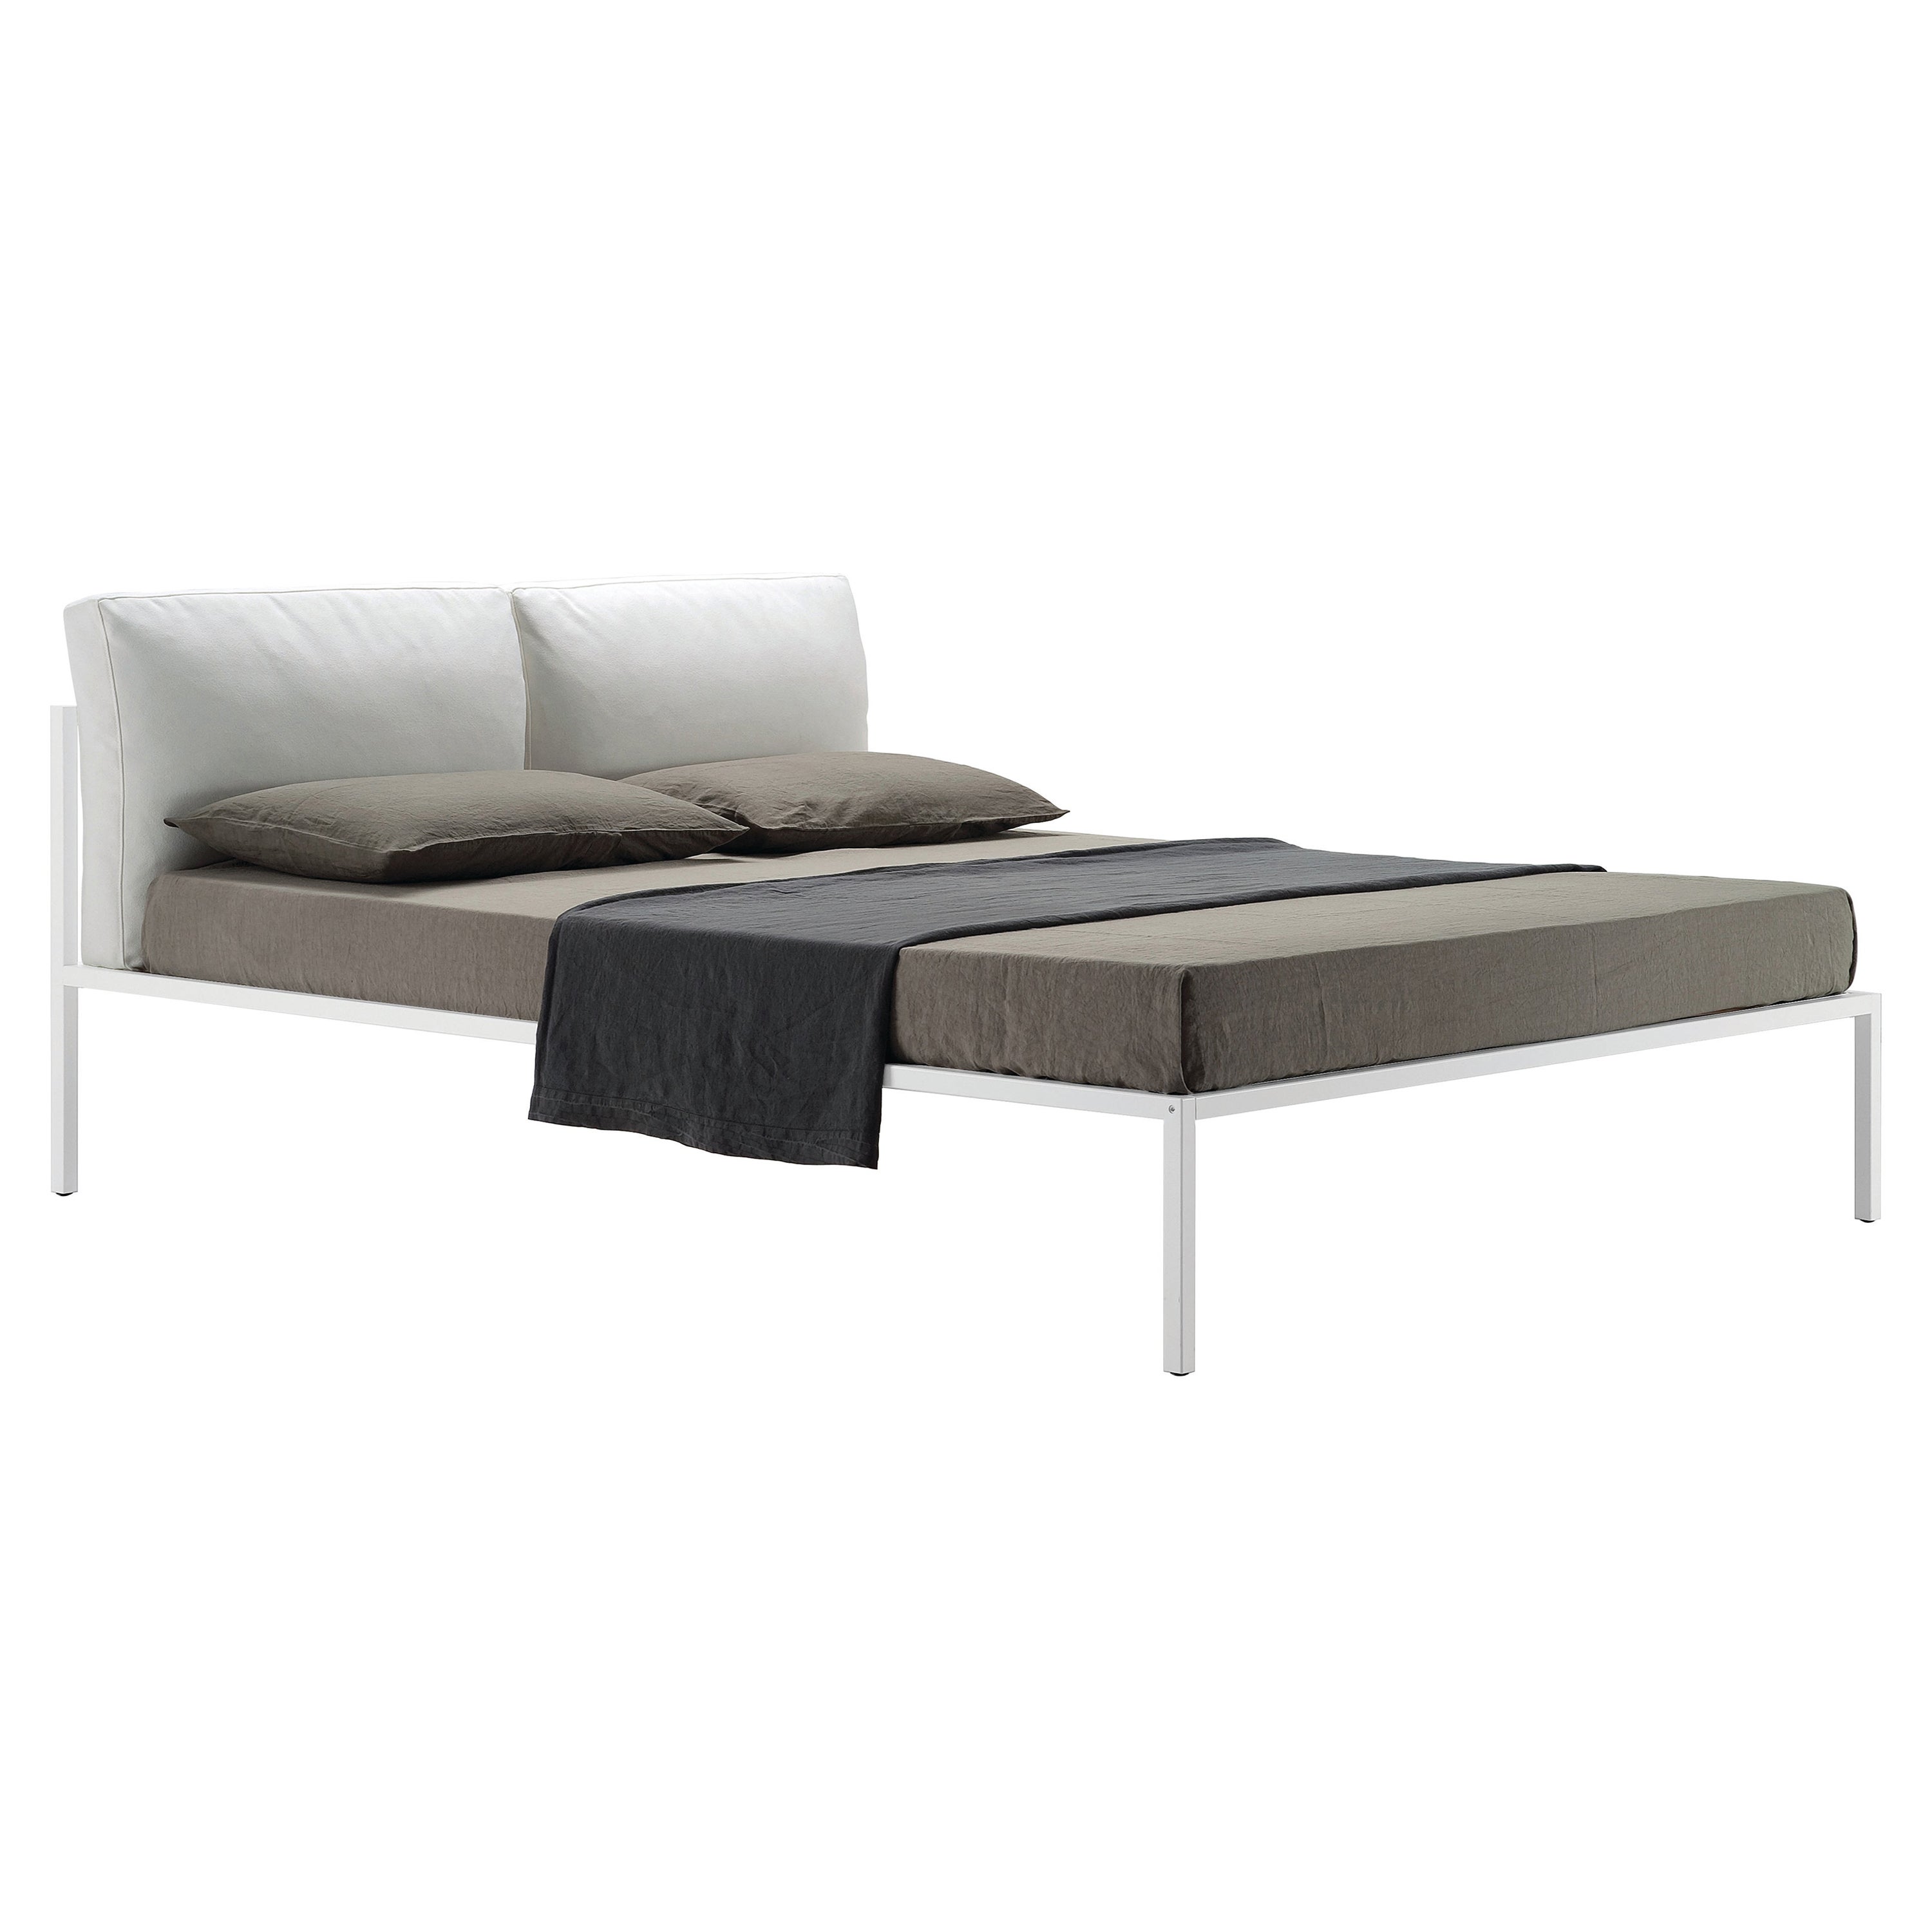 Zanotta Extra Large Nyx Bed in White Fabric with White Painted Steel Frame